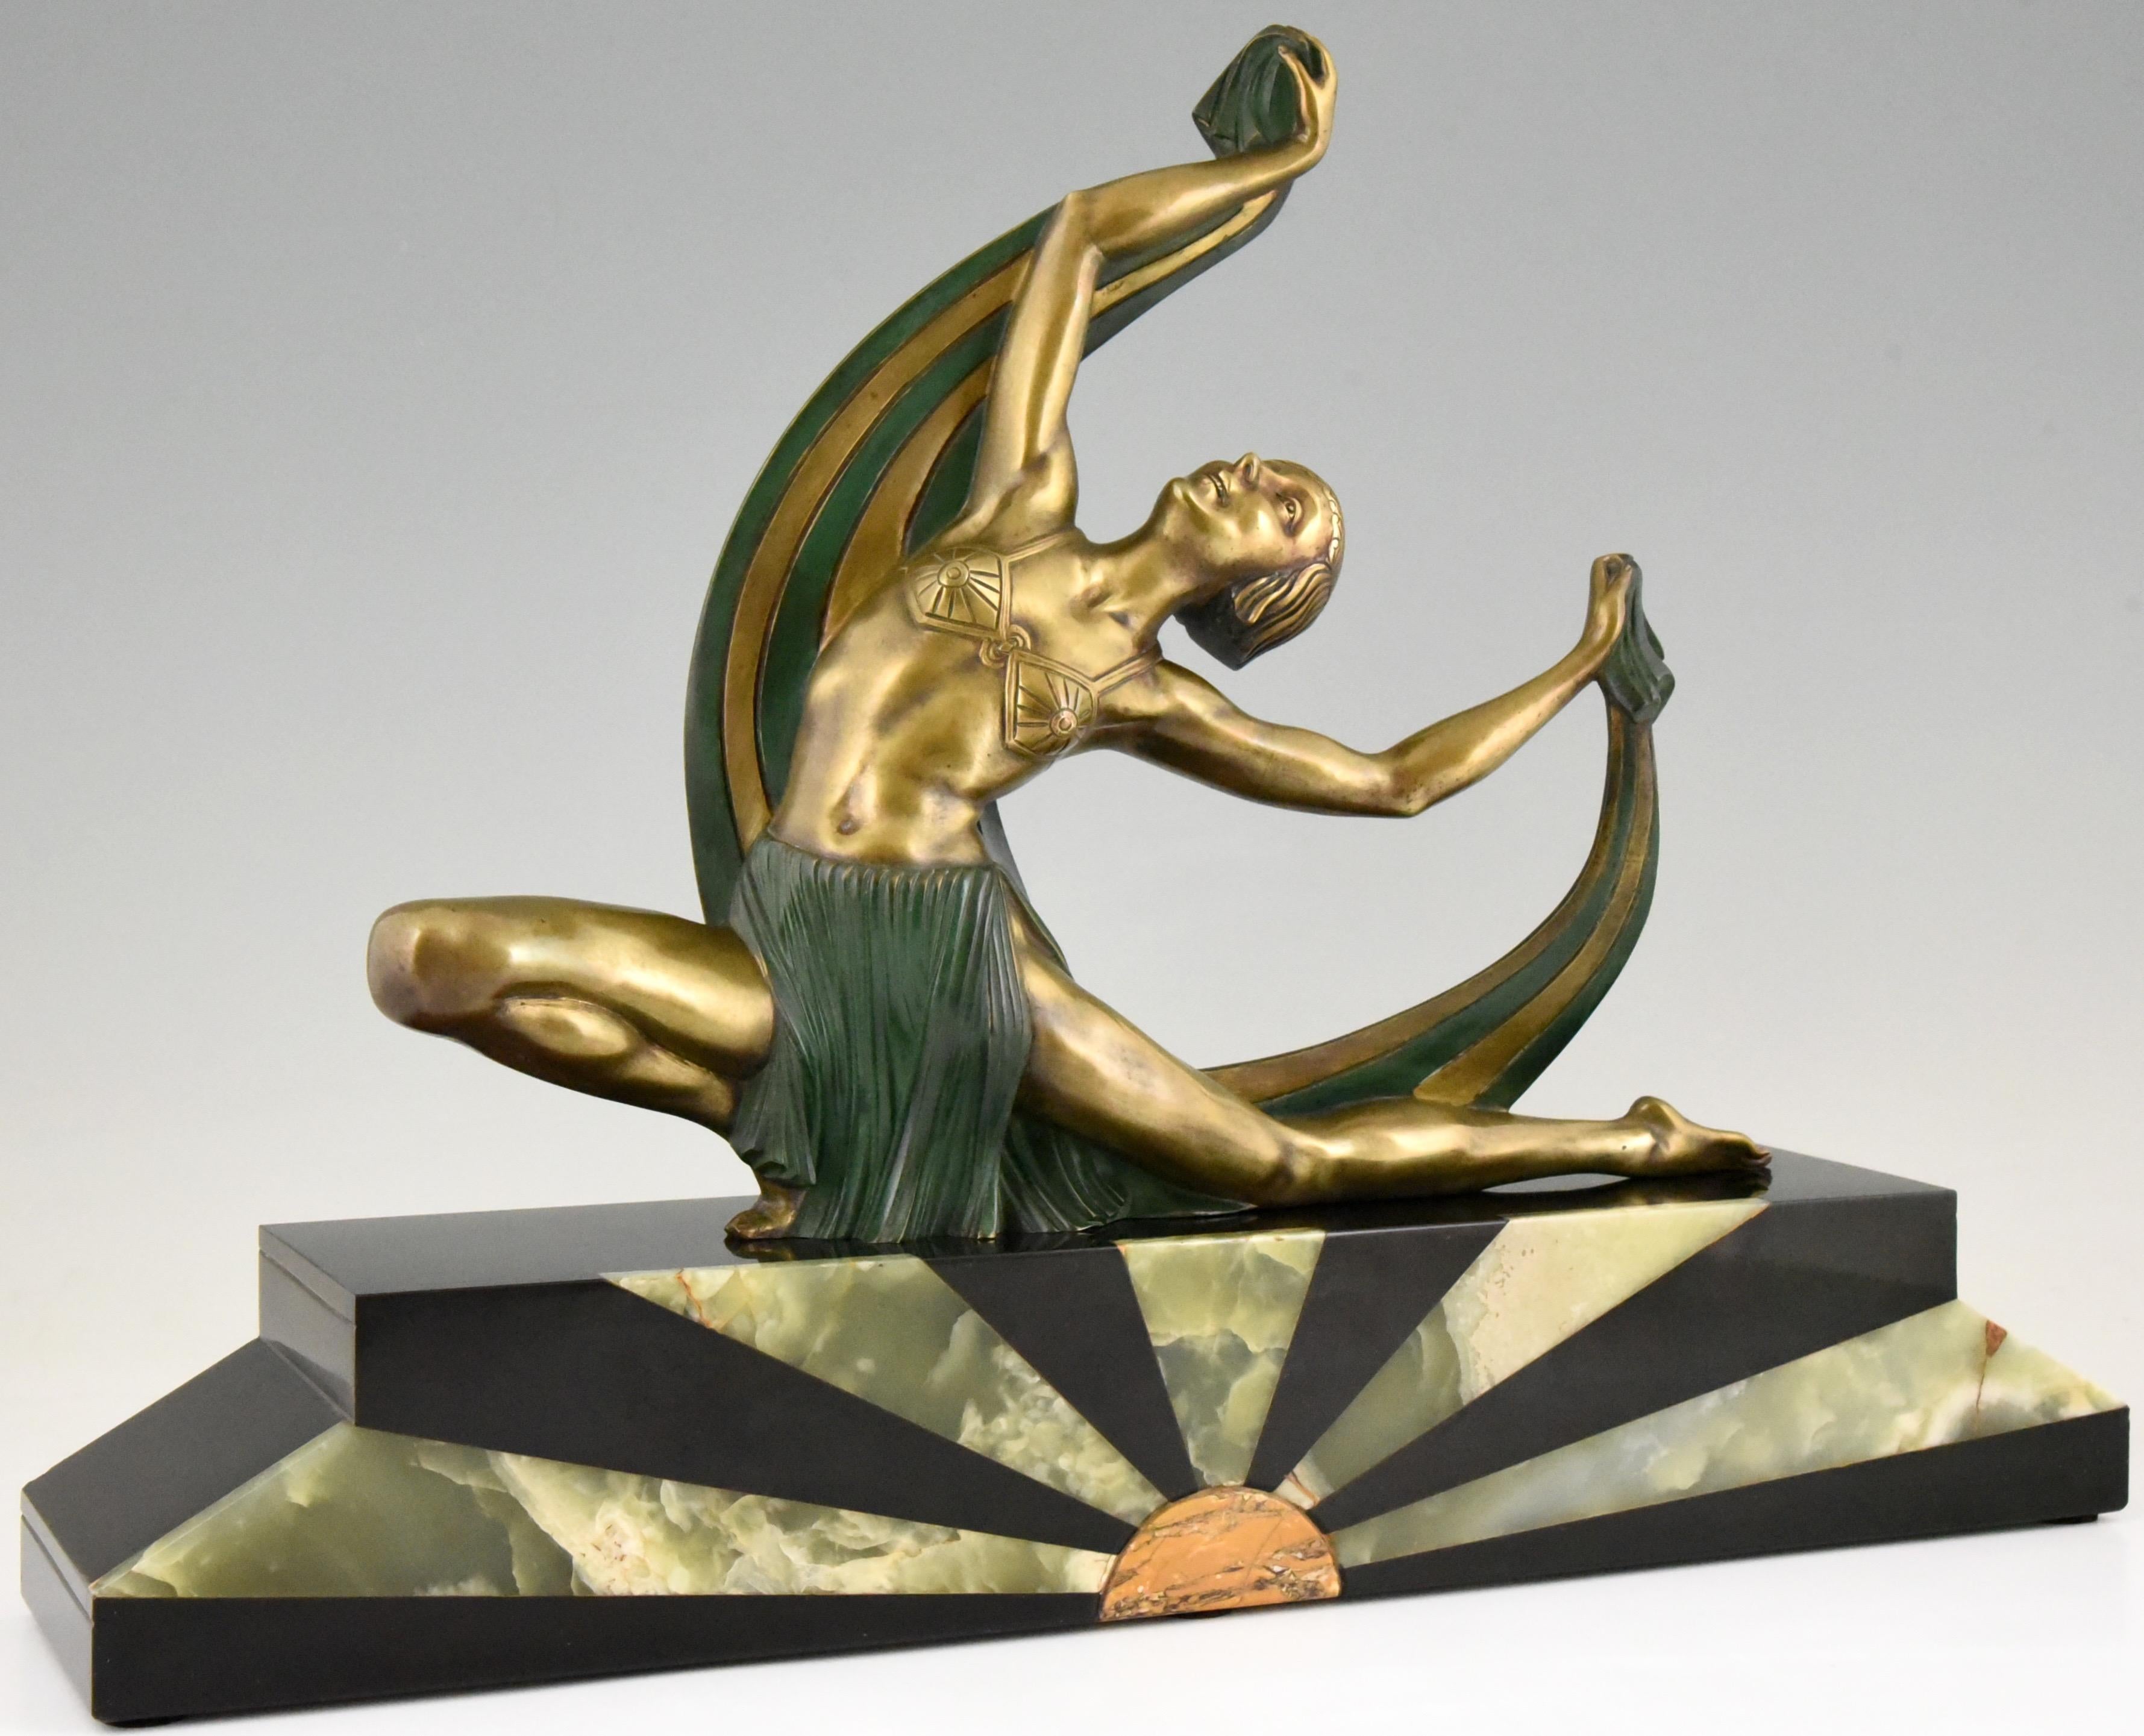 Impressive Art Deco bronze sculpture of a scarf dancer by Jean Lormier. The sculpture is mounted on a Belgian Black marble base with onyx sunburst inlay, France, 1925.
Literature:
“Art Deco and other figures” by Brian Catley. ?“Art deco sculpture”